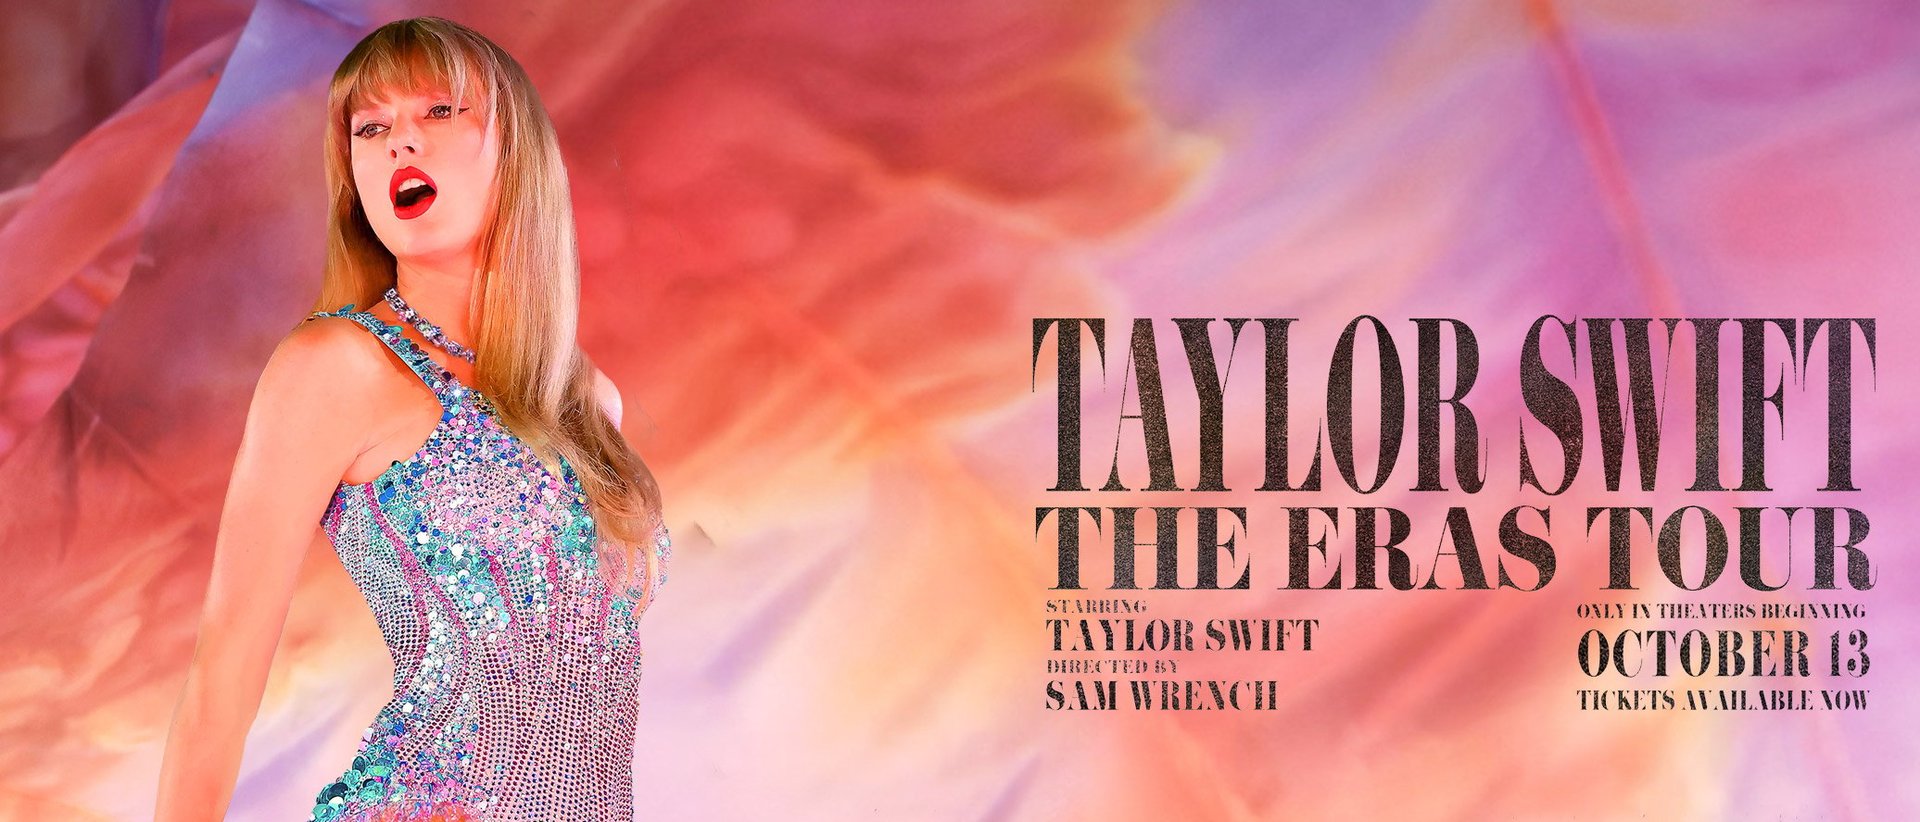 It's been a long time coming, but the TAYLOR SWIFT | THE ERAS TOUR concert film lights up our screen starting 10/13 🫶  🎟️ PURCHASE PRE-SALE TICKETS HERE 🎟️